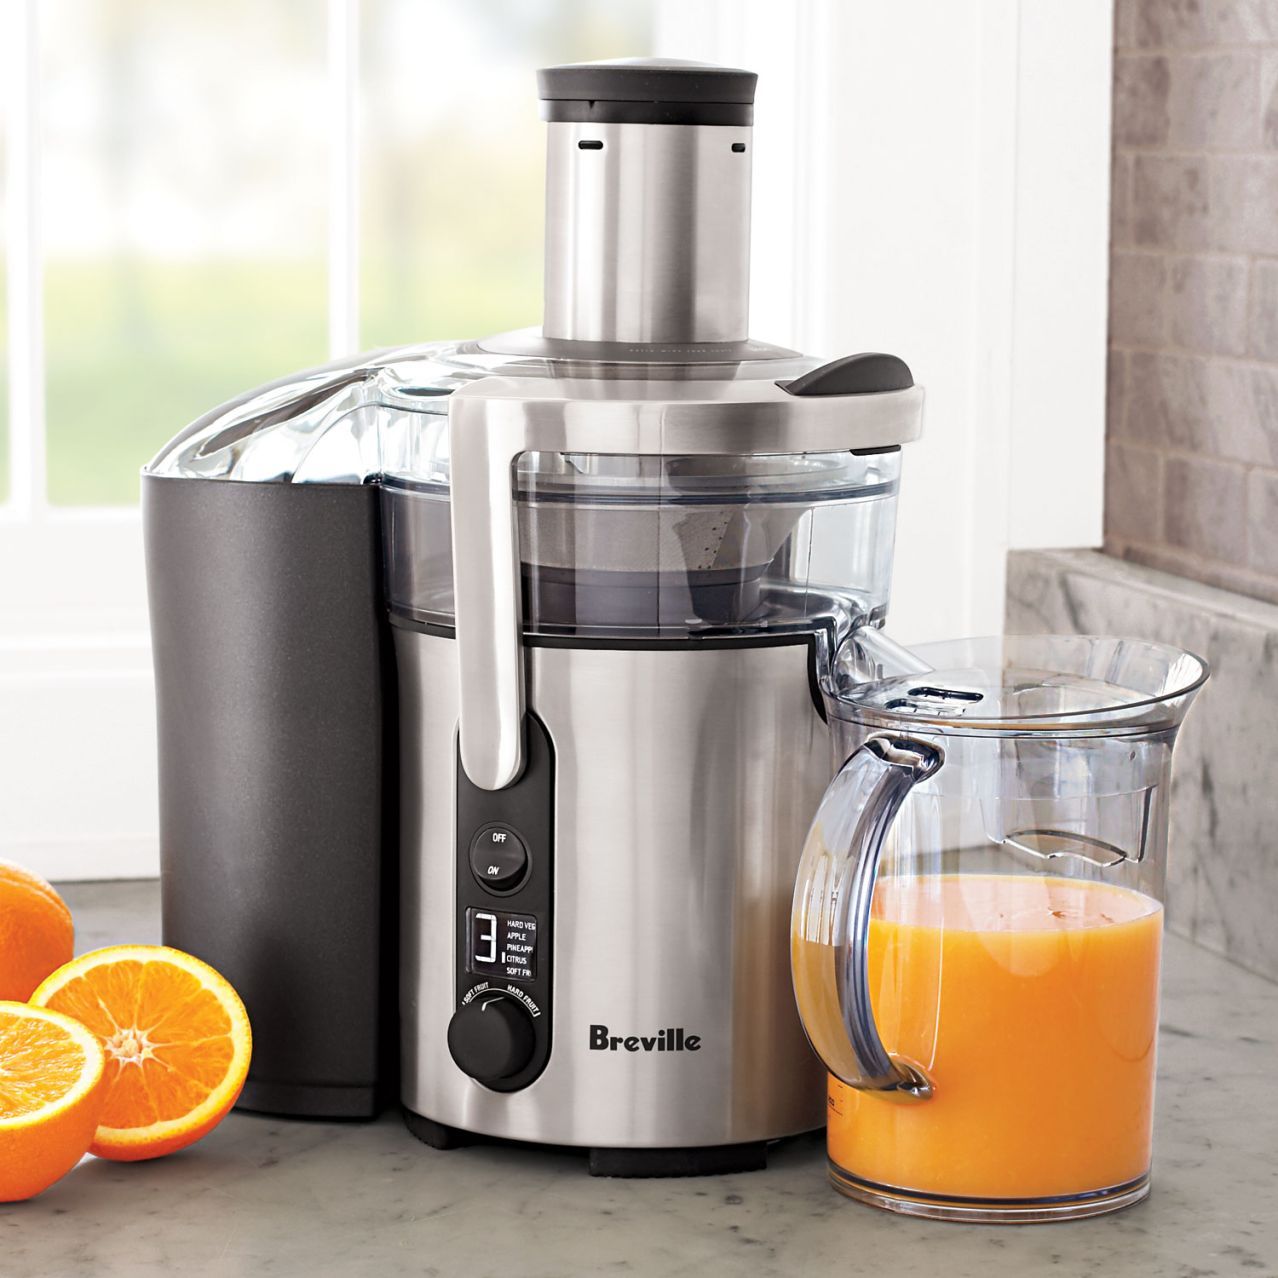 Where To Buy The Breville Juicer